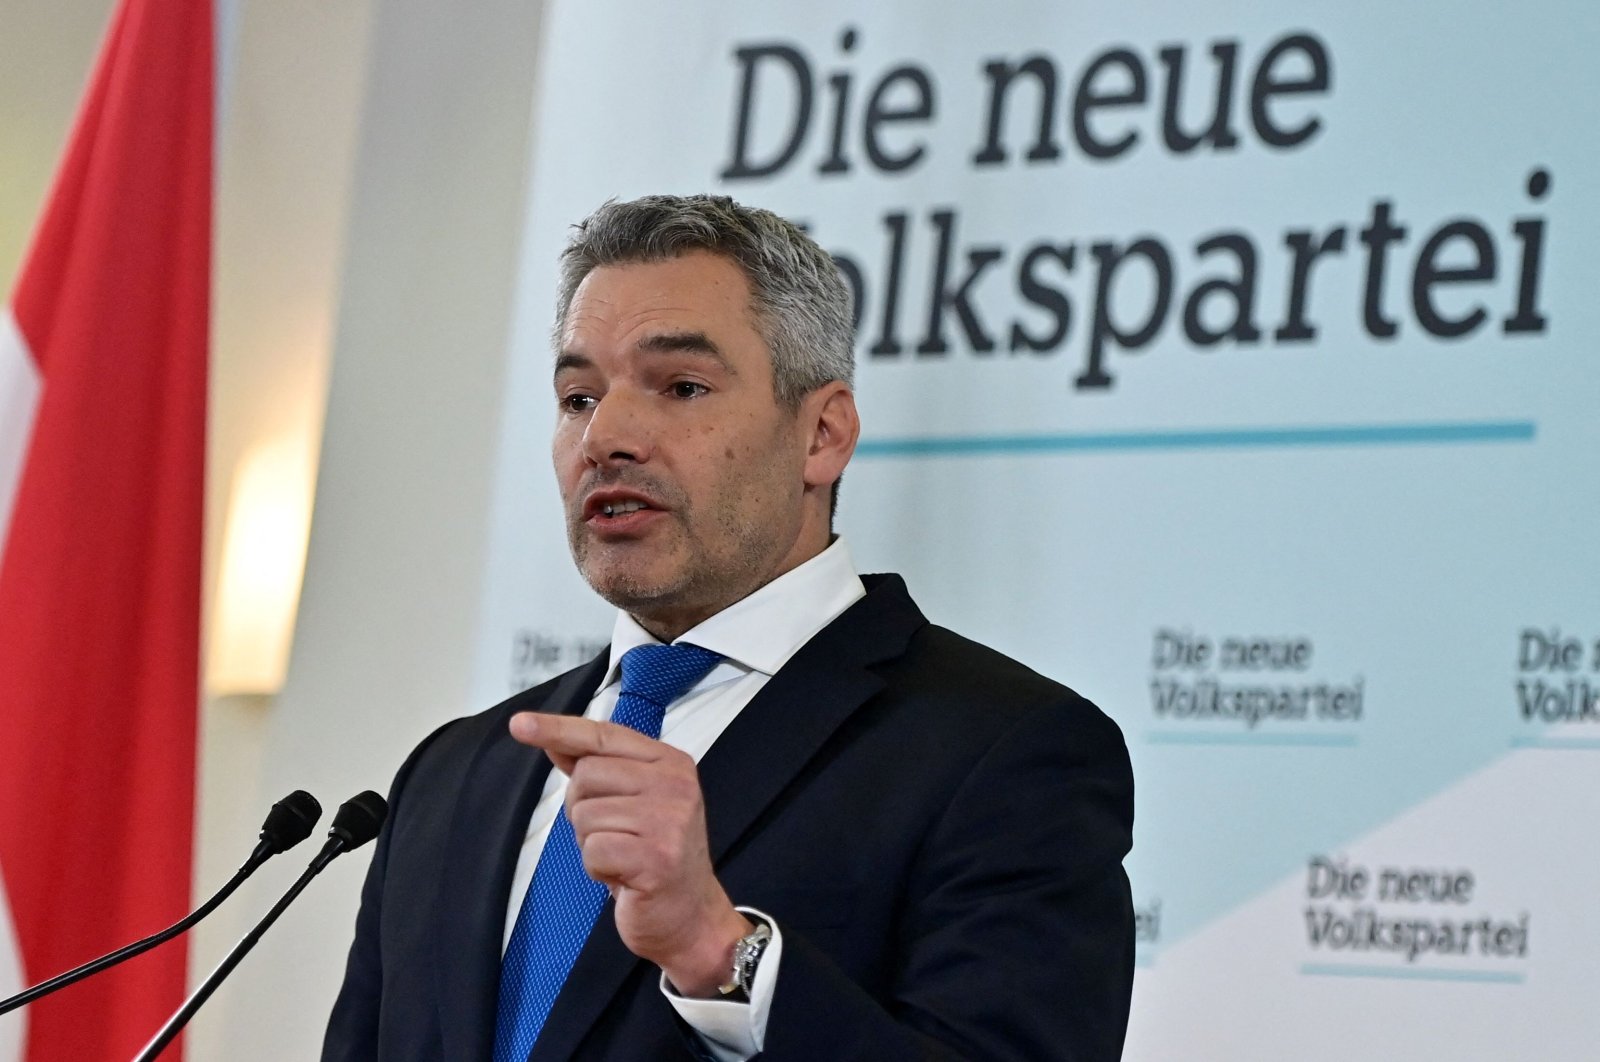 Austria&#039;s Interior Minister and OVP General-Secretary Karl Nehammer addresses a press conference to announce that he has been named as Austria&#039;s new chancellor during a meeting of Austria&#039;s conservative People&#039;s Party OVP in Vienna on Dec. 3, 2021. (AFP Photo)